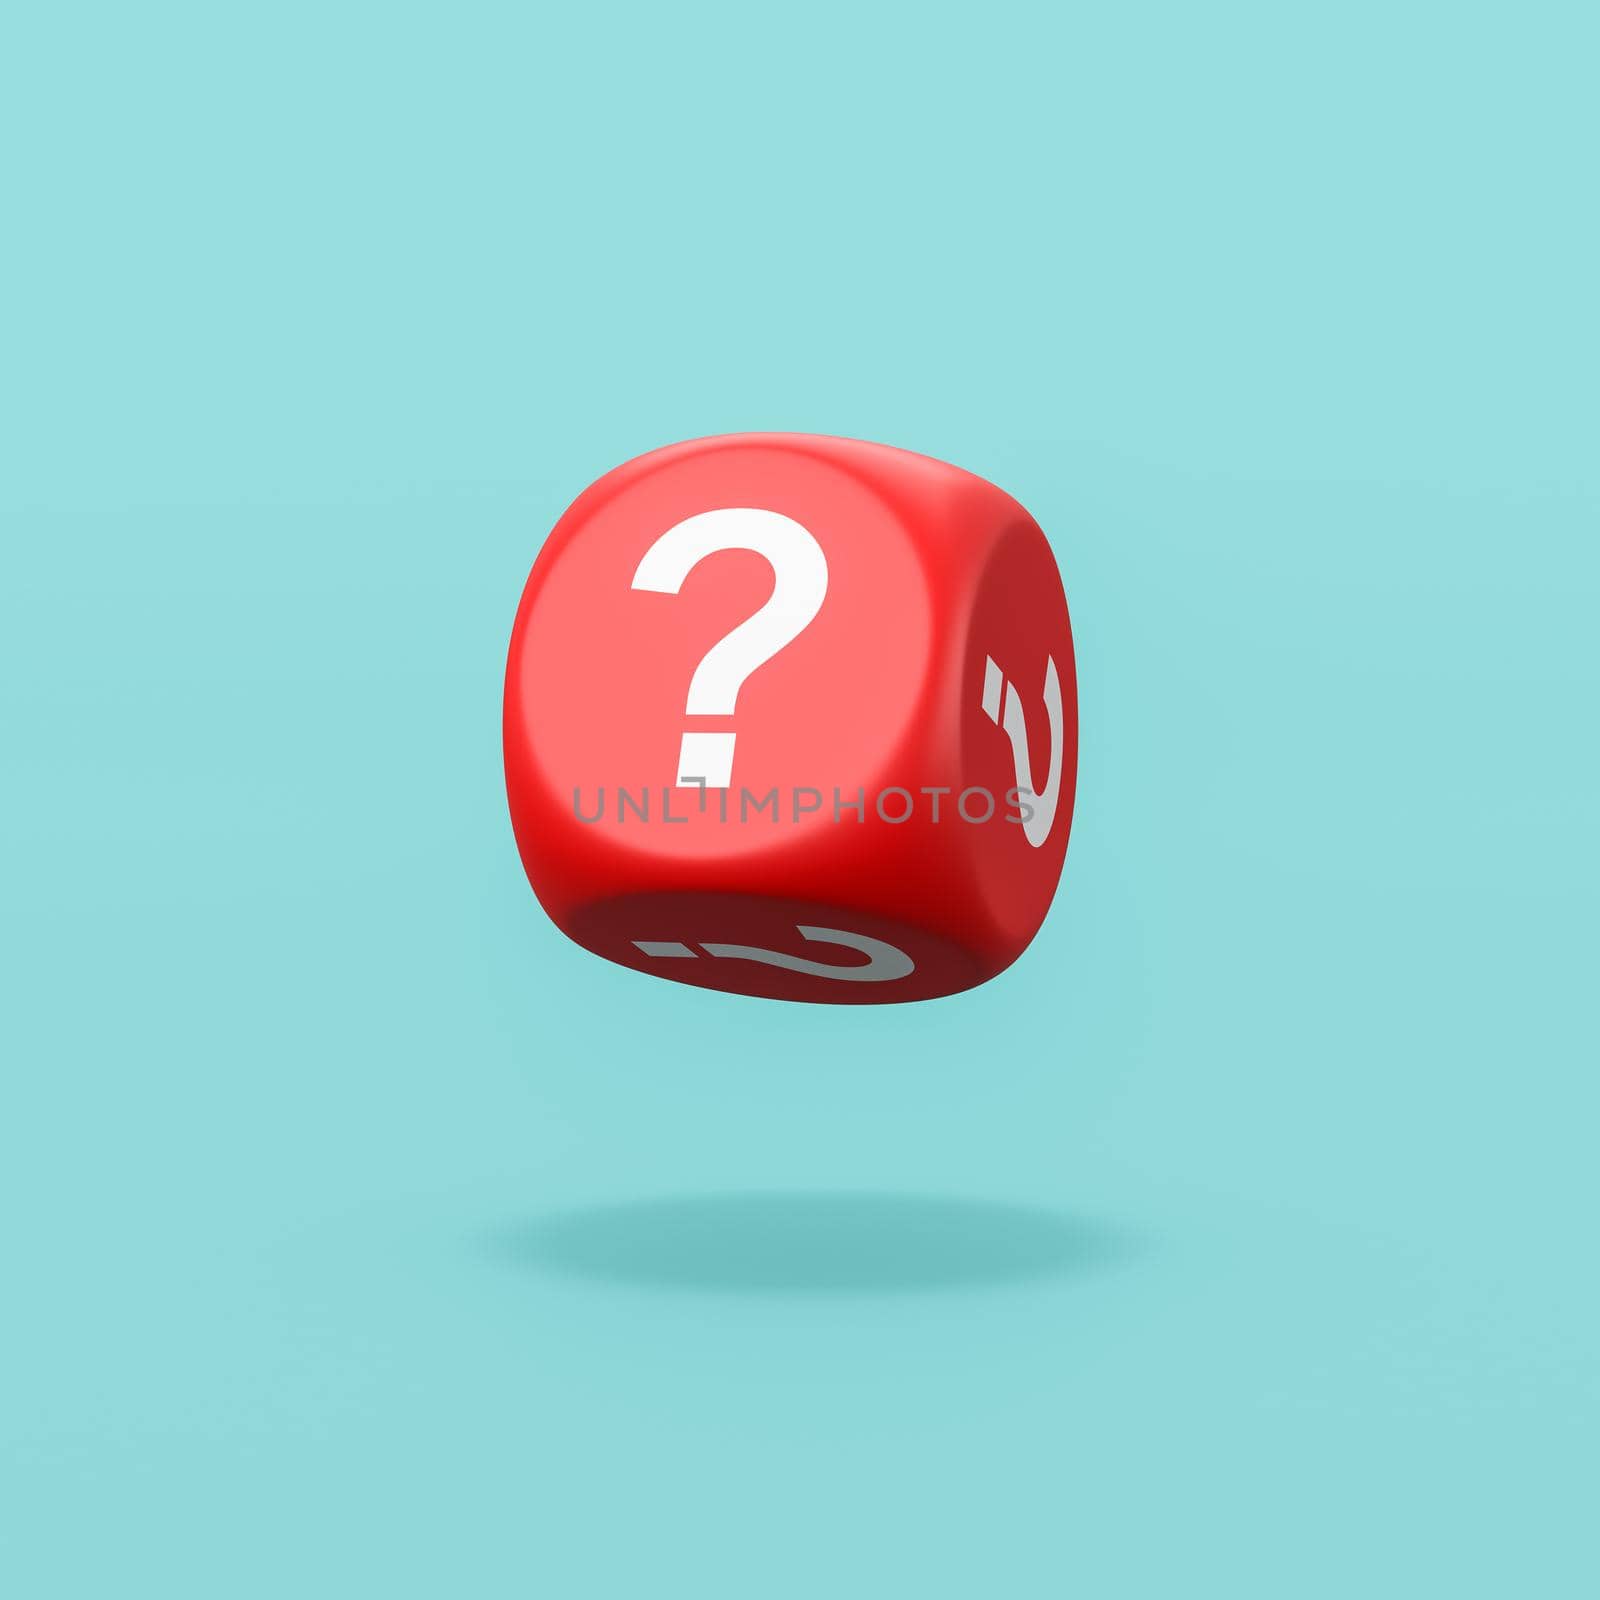 One Single Red Dice with Question Mark on Every Face Isolated on Flat Blue Background with Shadow 3D Illustration